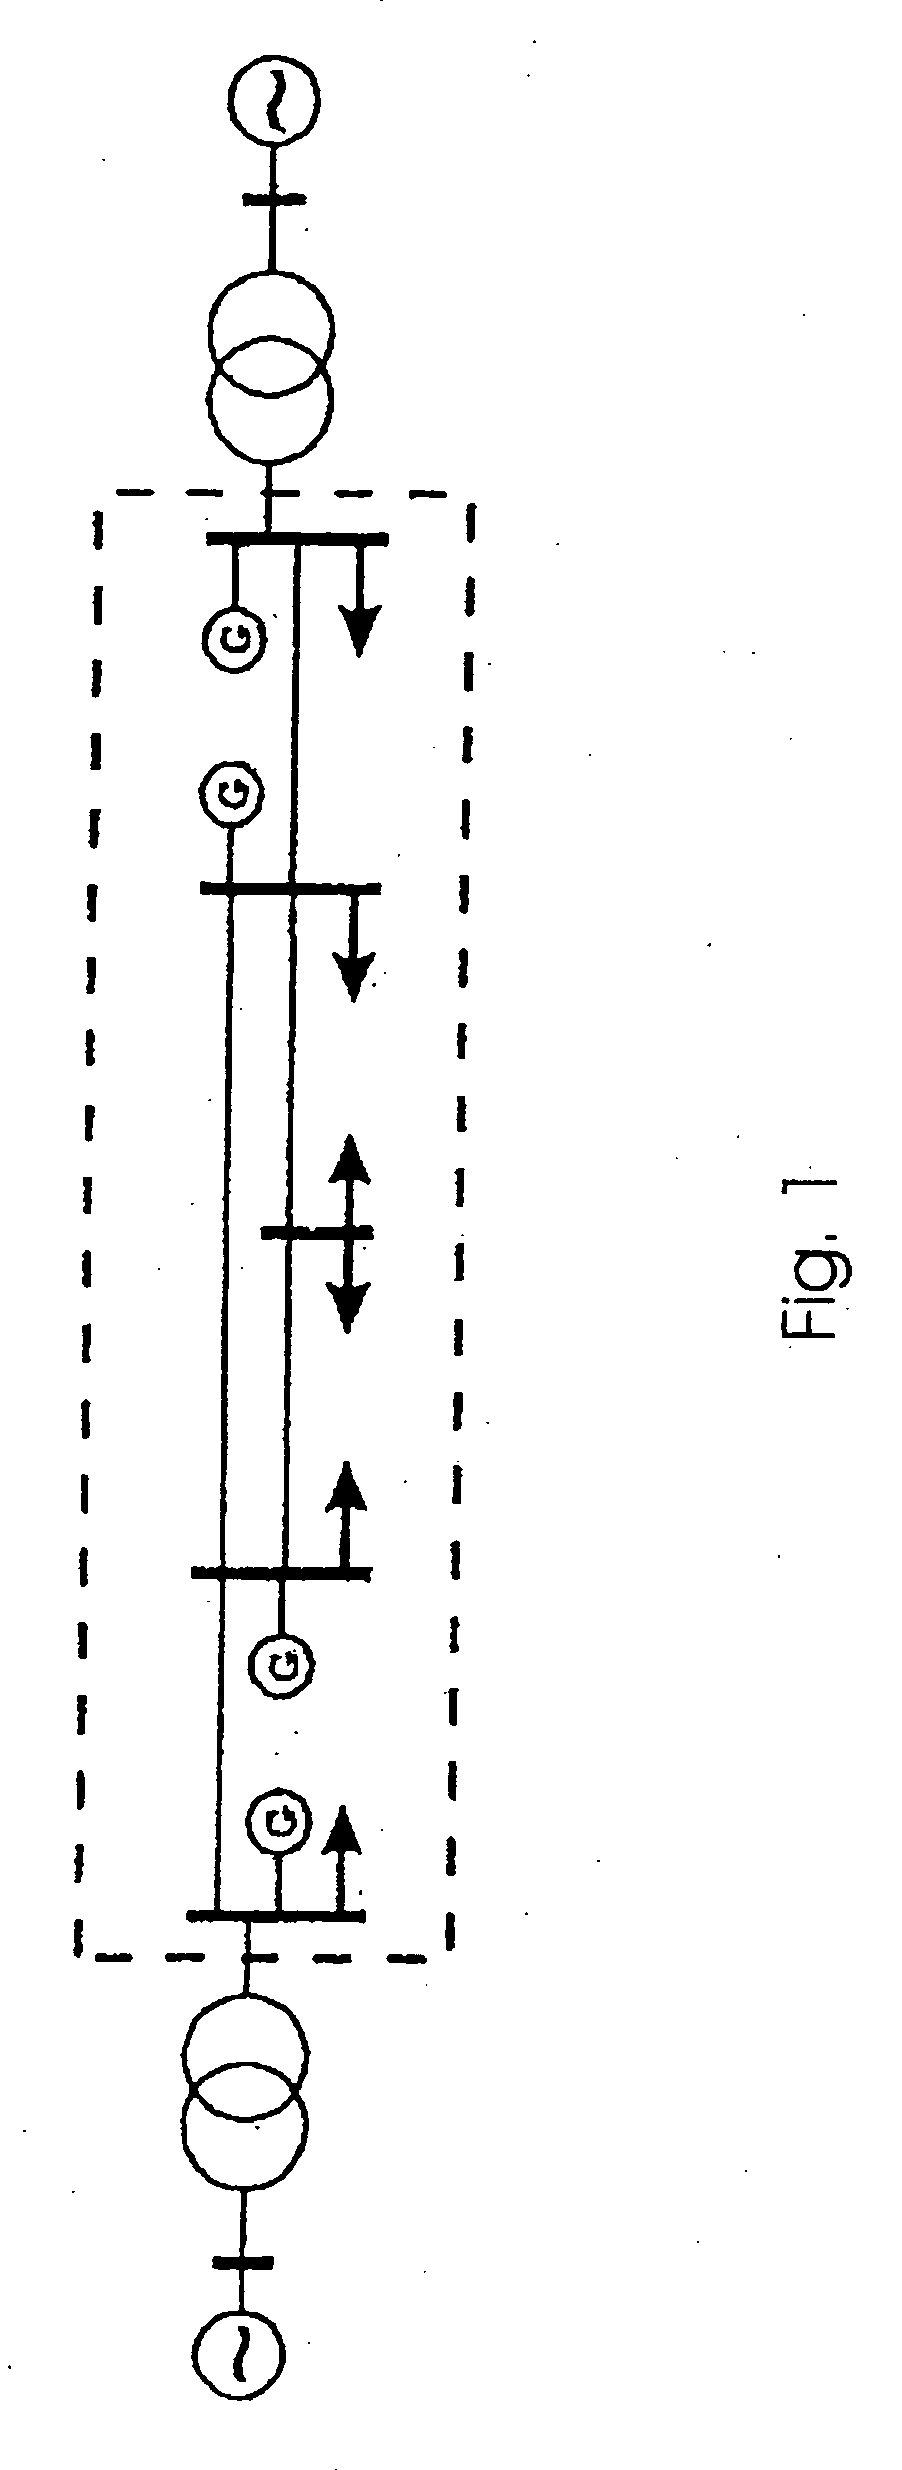 Method for operating a wind turbine during a disturbance in the grid